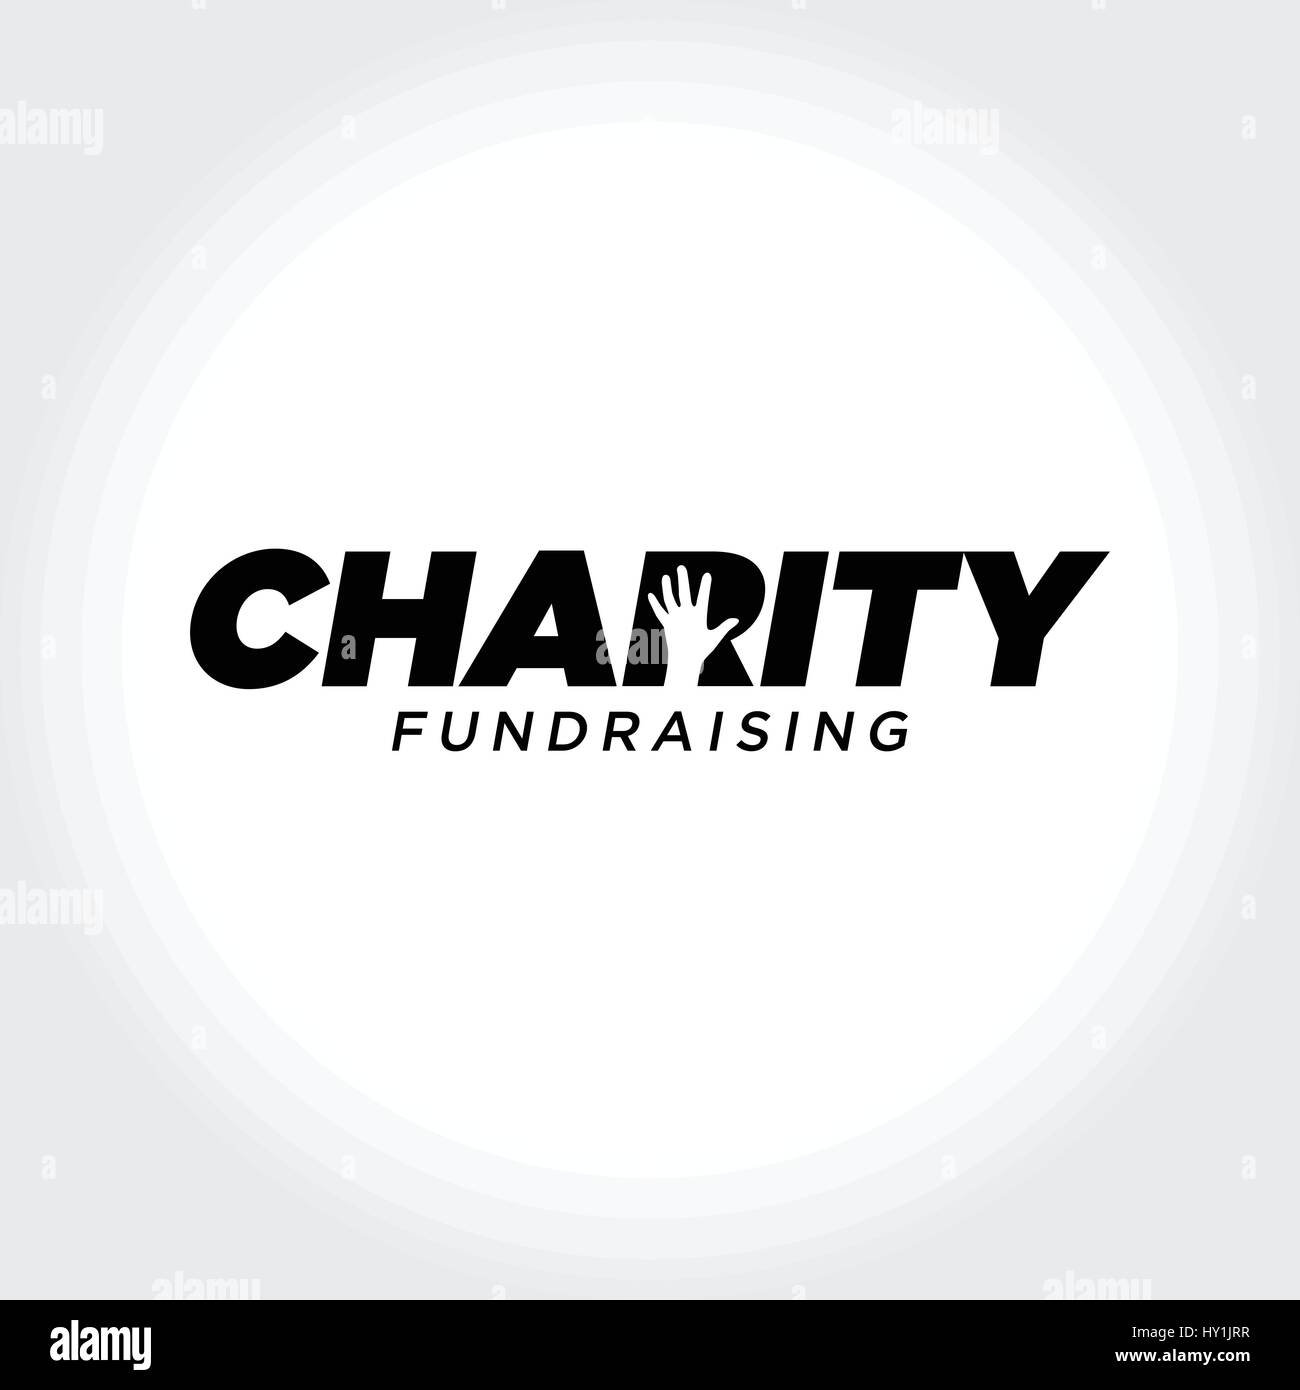 Helping People. Charity and Fundraising illustration Stock Vector